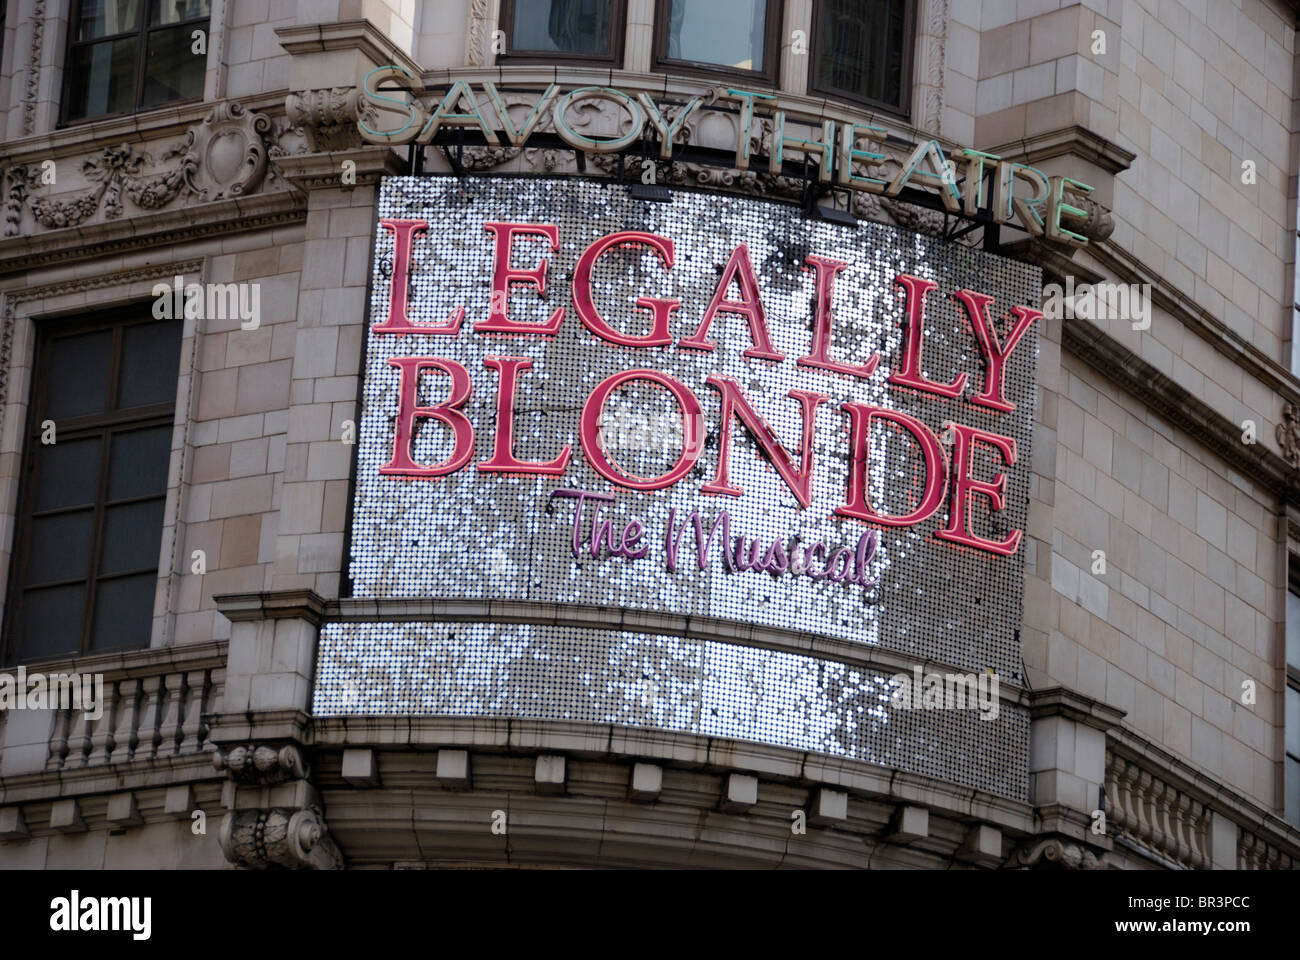 A large billboard promoting the musical 'Legally Blonde' outside the Savoy Theatre, London, England Stock Photo